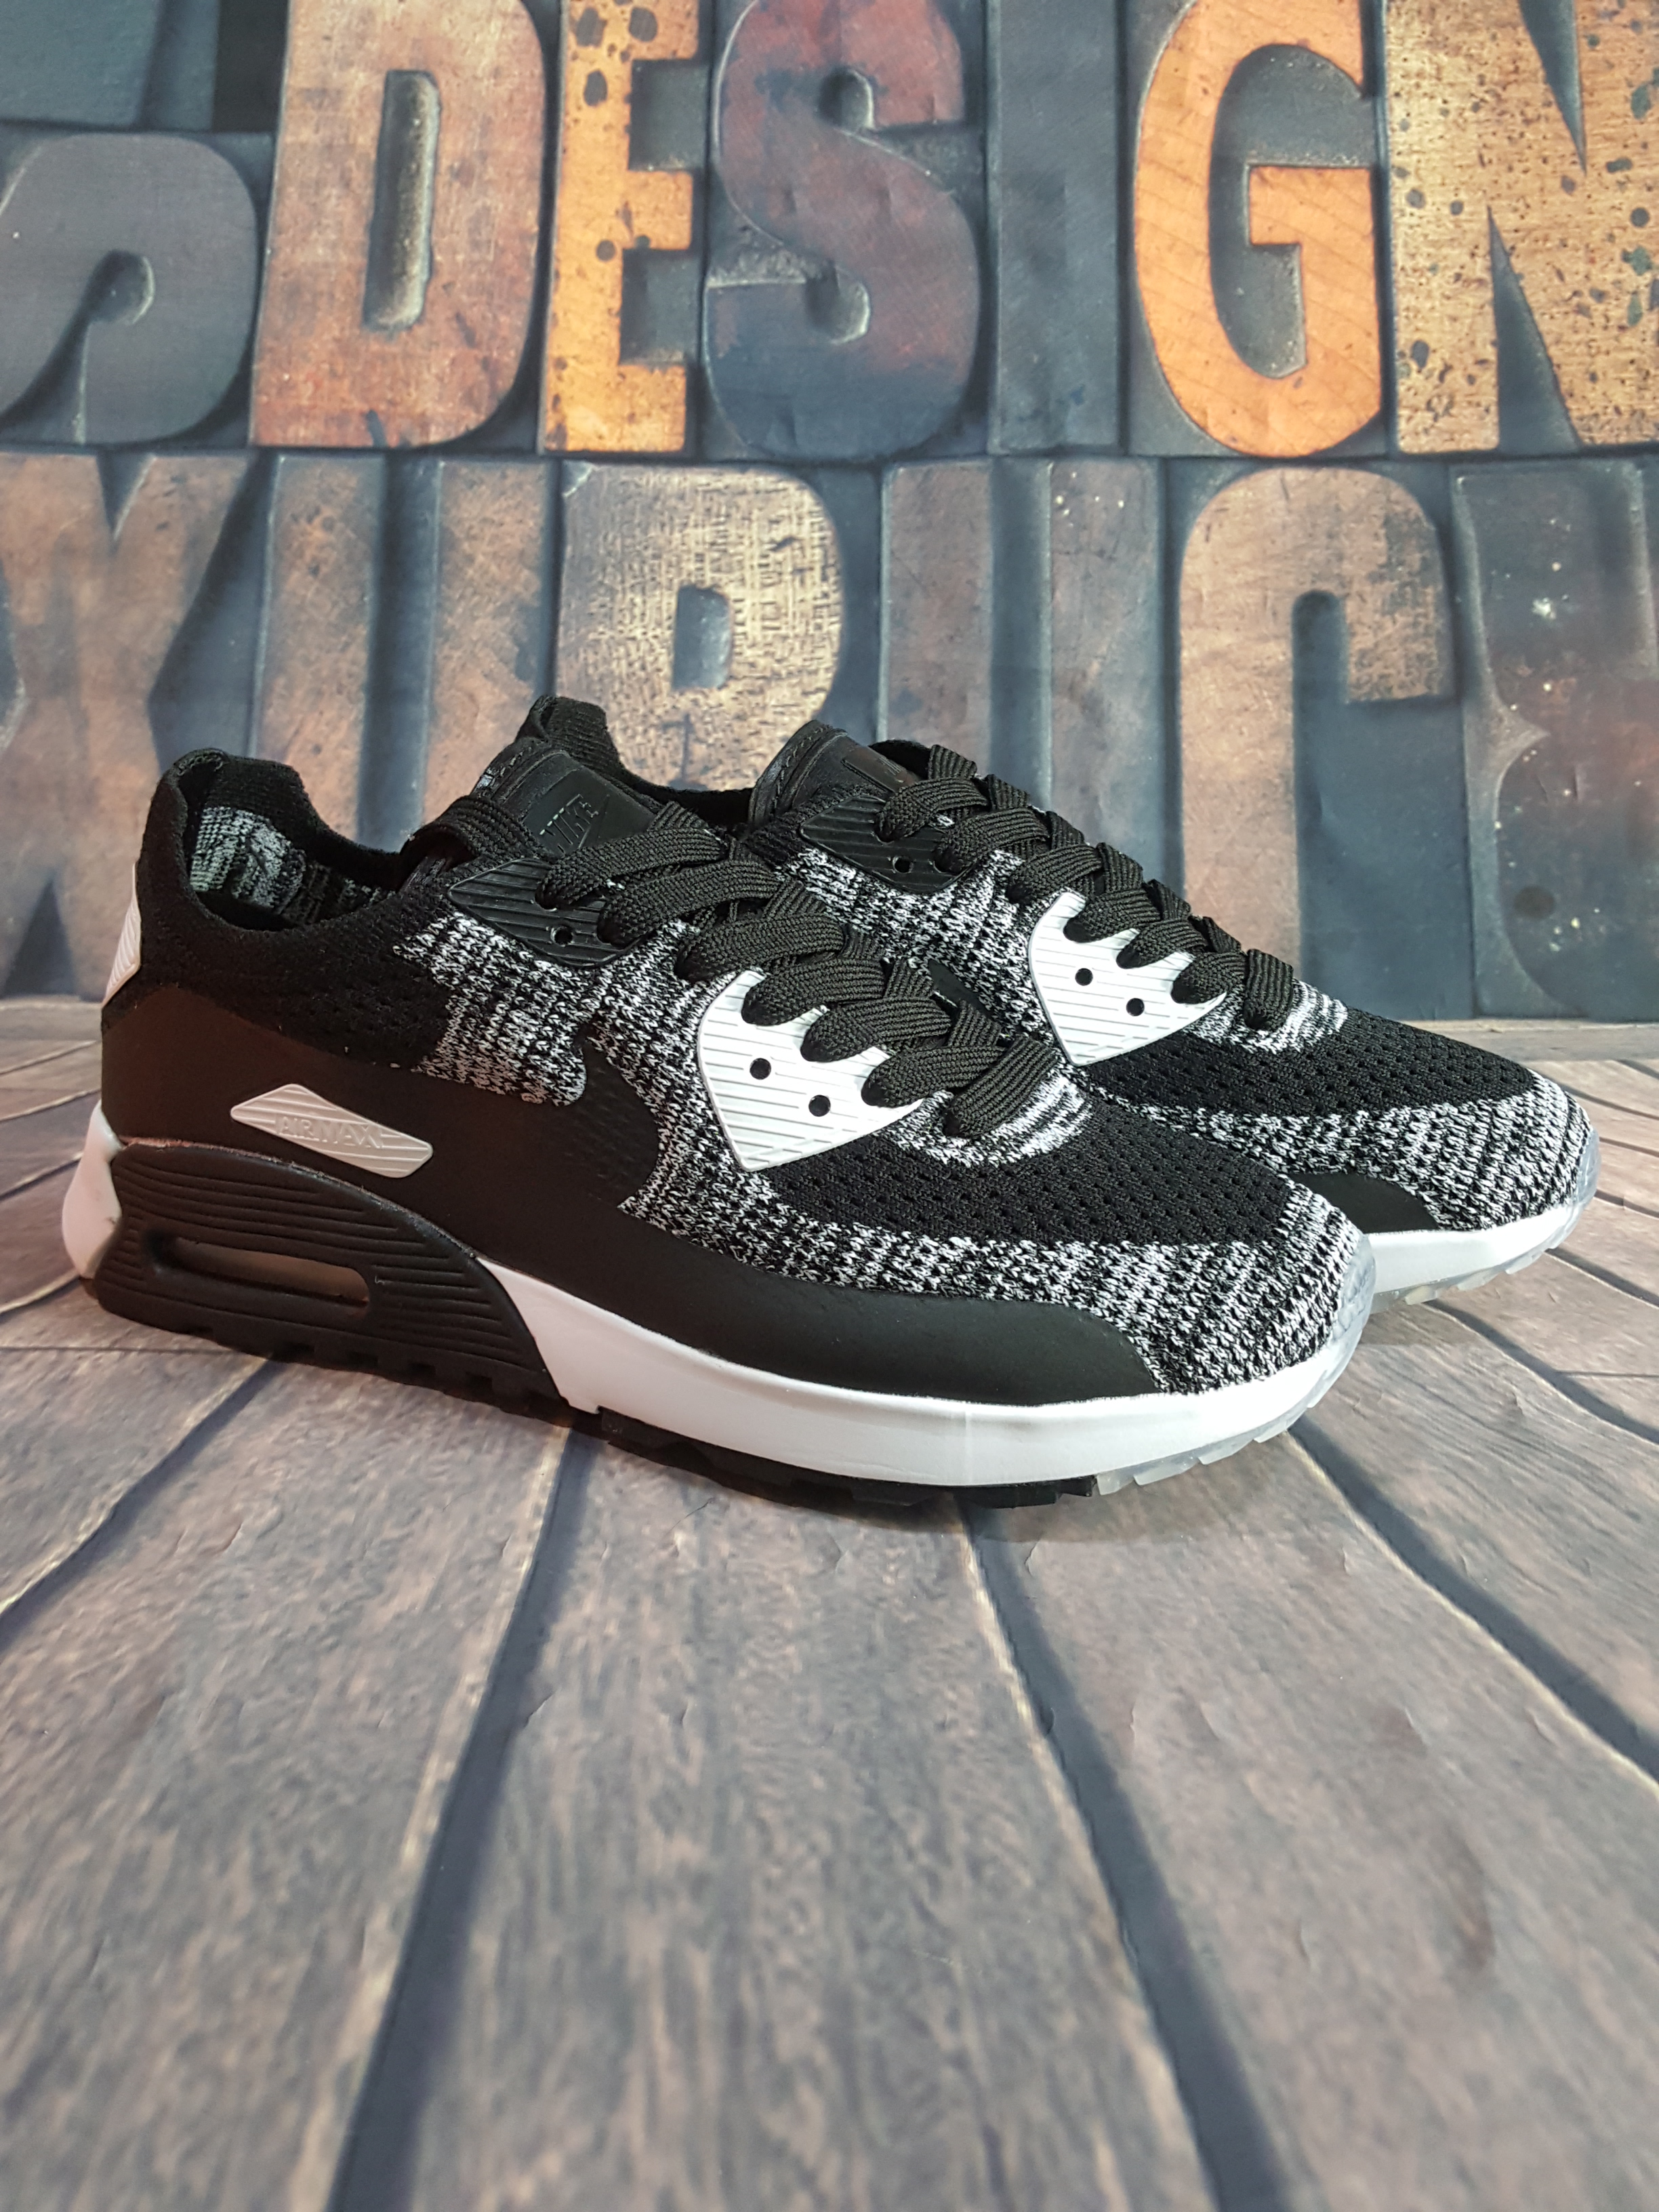 Nike Air Max 90 Flyknit Black White Shoes - Click Image to Close